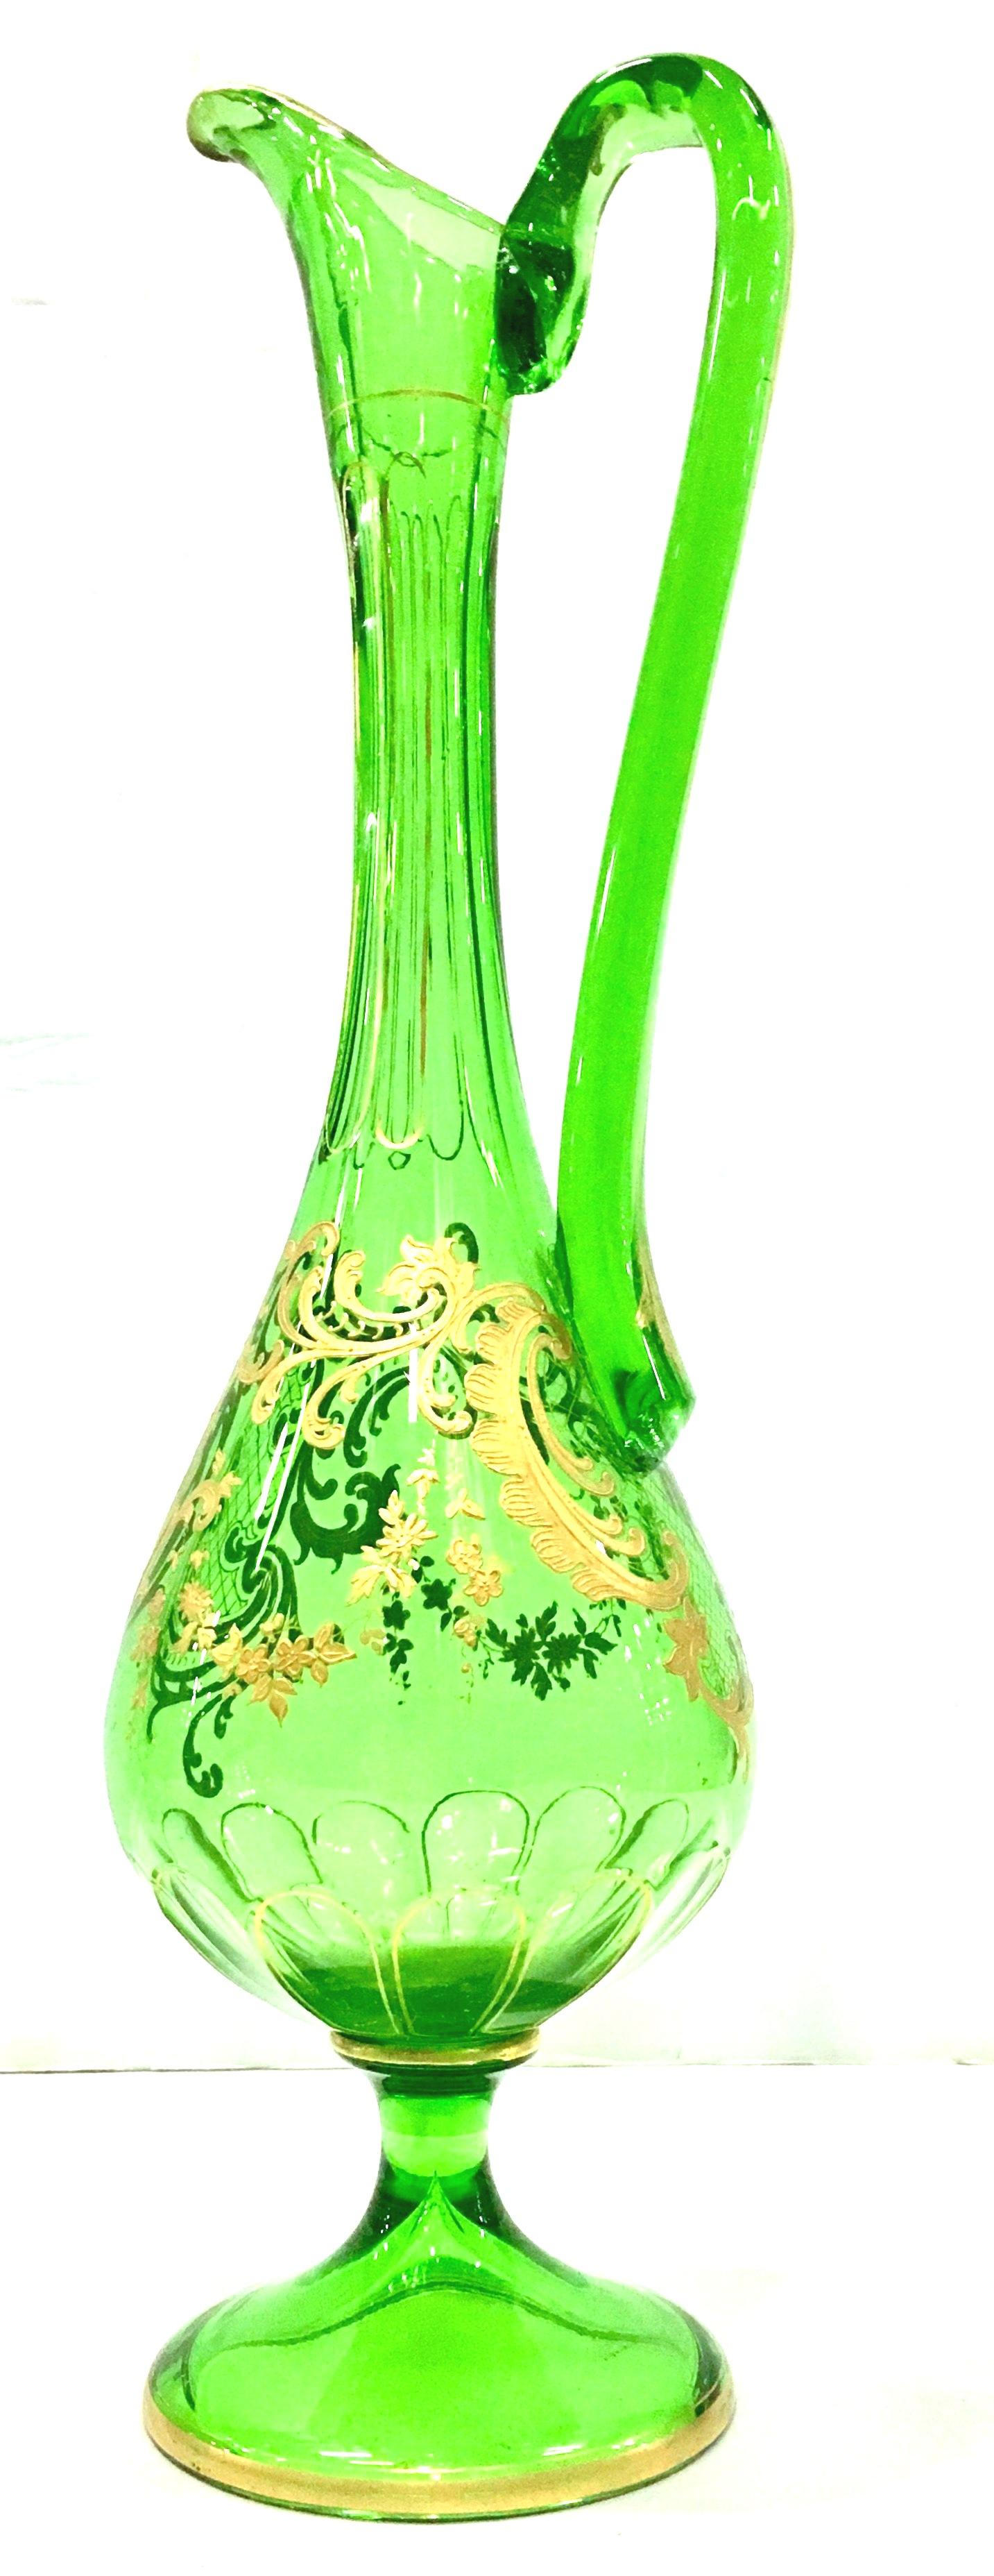 Midcentury Italian Venetian chartreuse green optic blown glass and raised 22-karat gold hand painted six-piece drinks set. This six-piece set includes one applied handle and spouted footed pitcher and five cordial brandy glasses. Each piece features